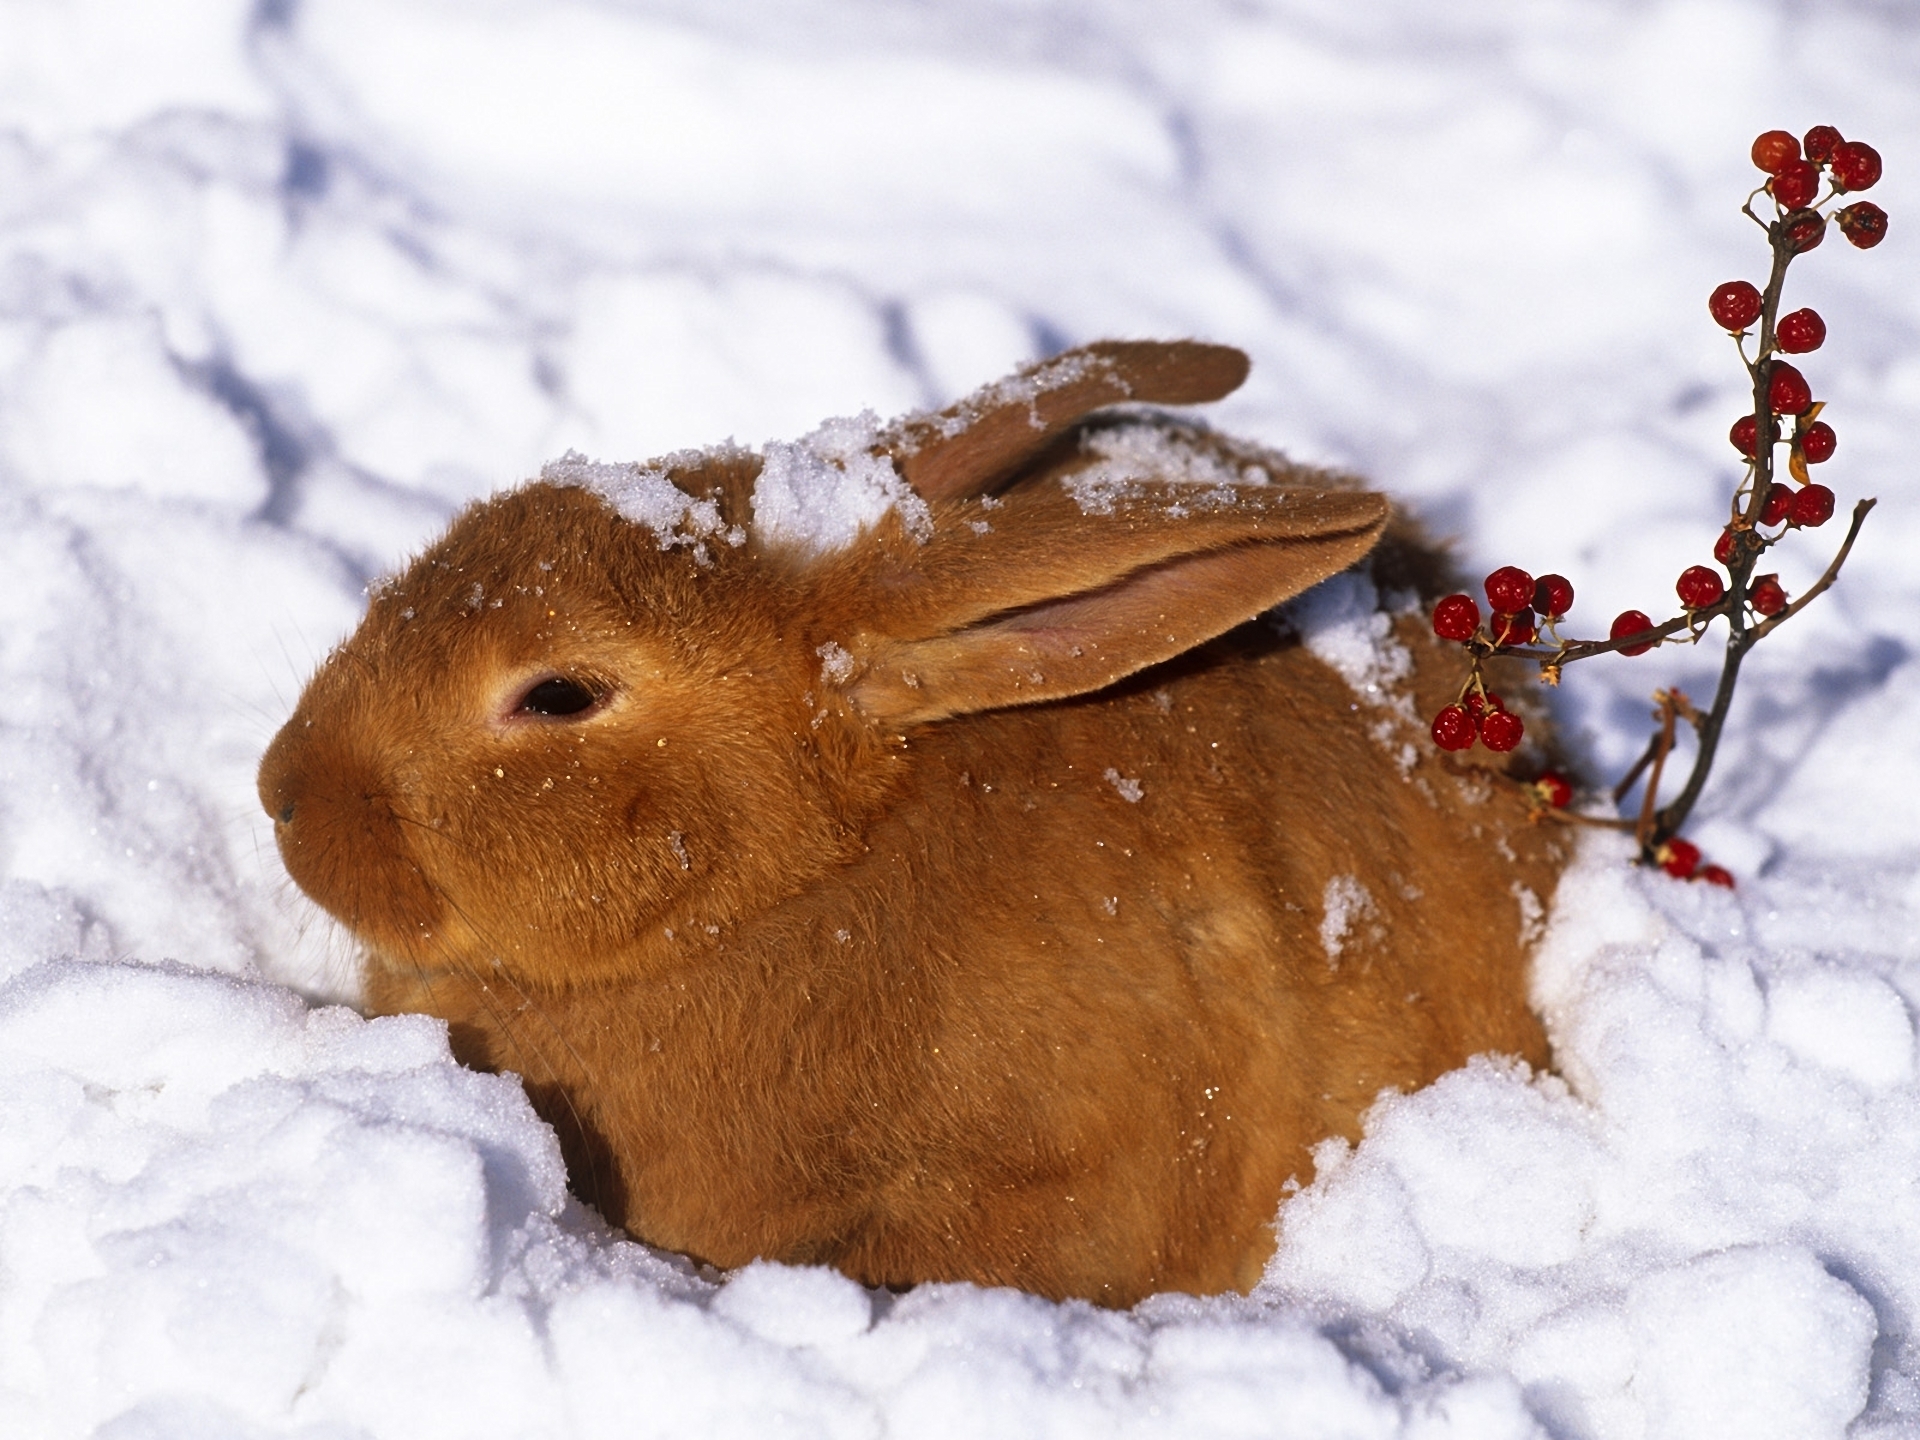 134436 Screensavers and Wallpapers Rabbit for phone. Download animals, winter, snow, berries, red, redhead, rabbit, hare pictures for free